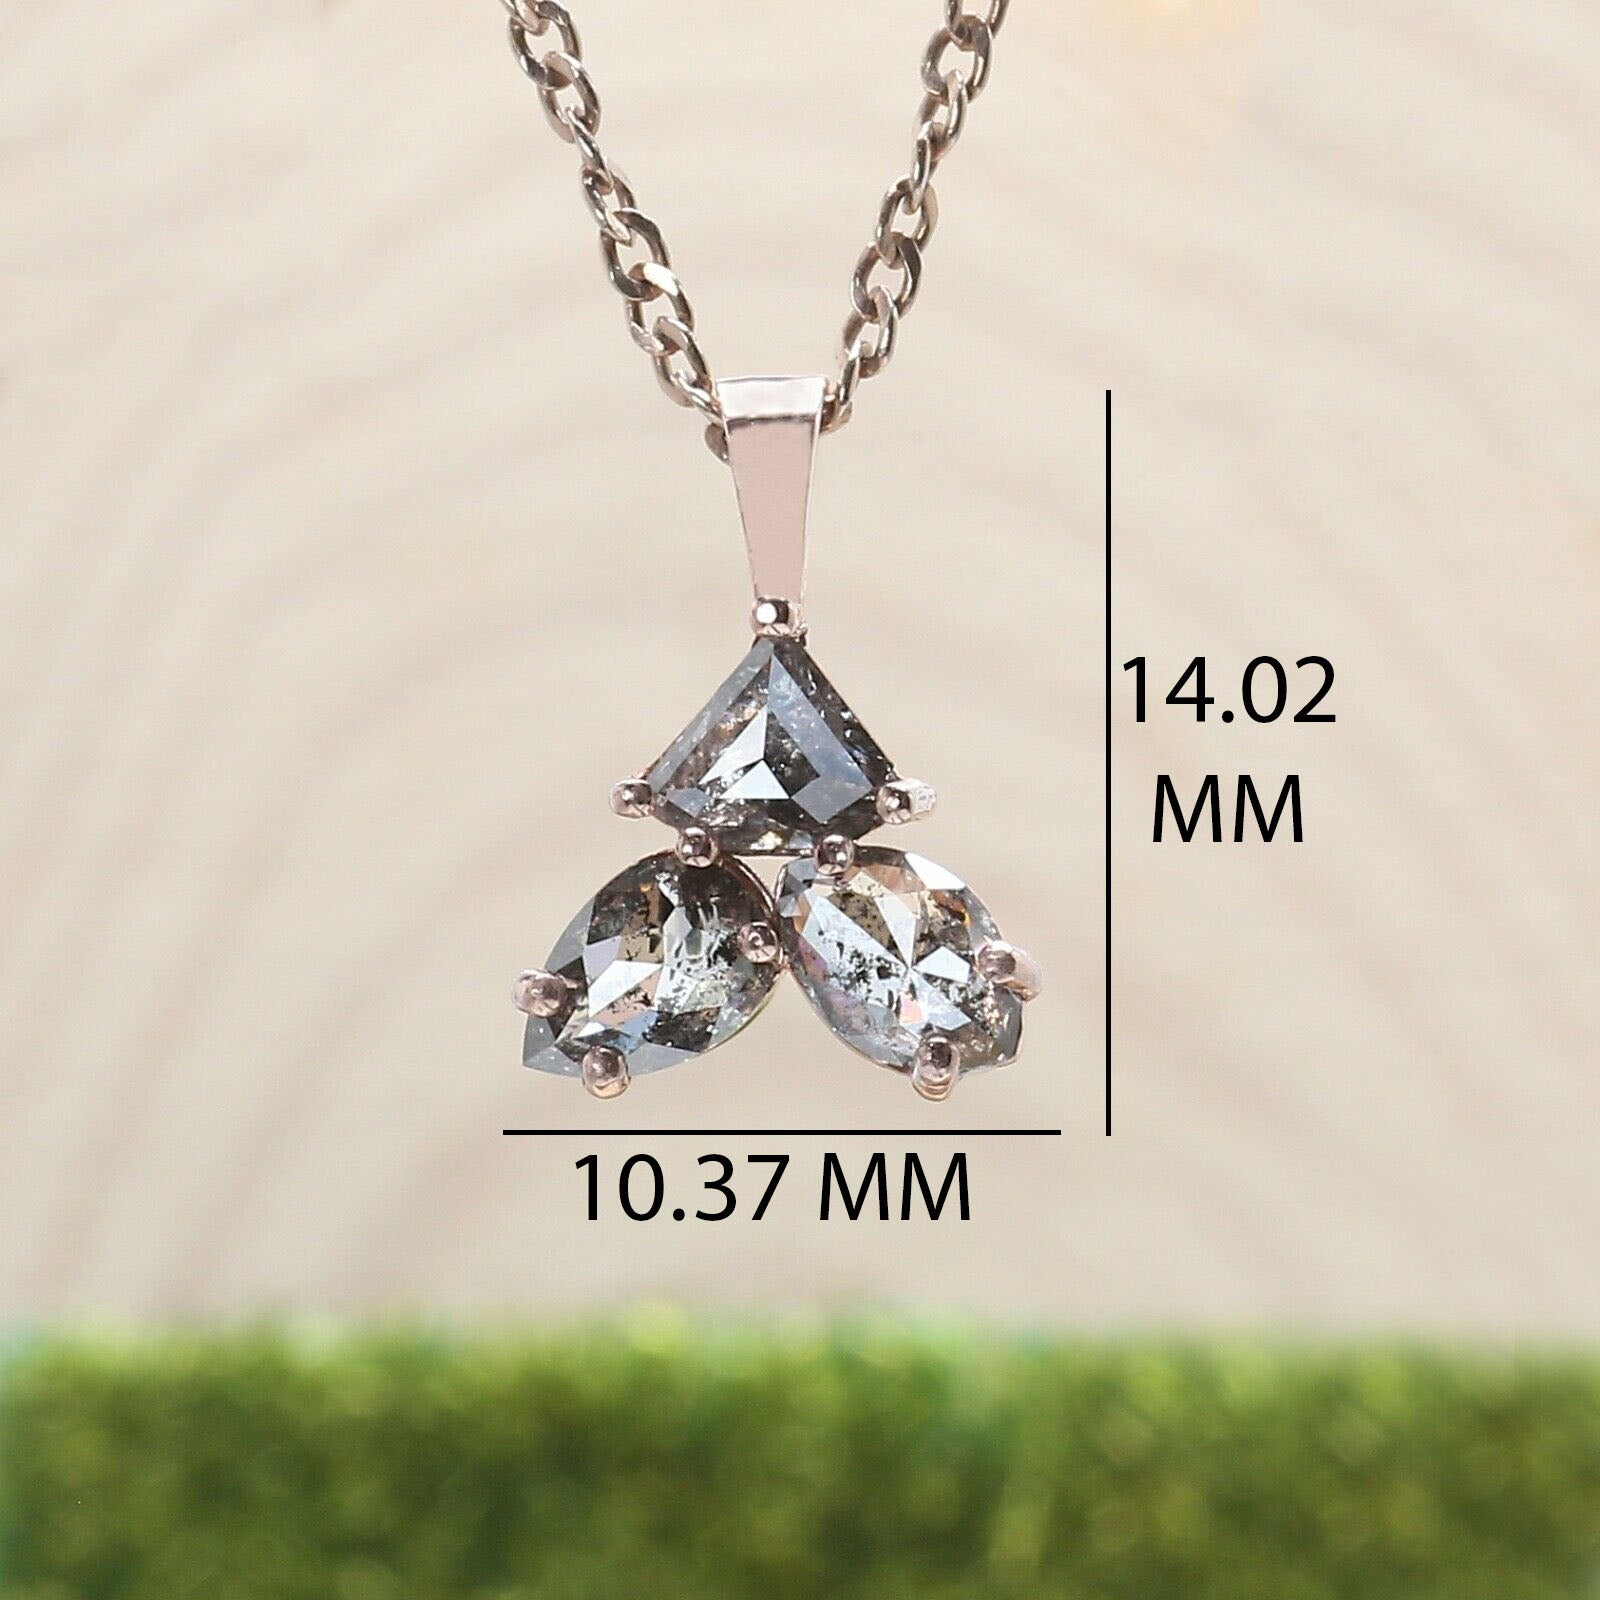 Mix Shape Salt And Pepper Diamond Pendant,Unique Diamond Pendant,Mix Shape Dangling Diamond Necklace, No Chain Including Only Pendant KDN890